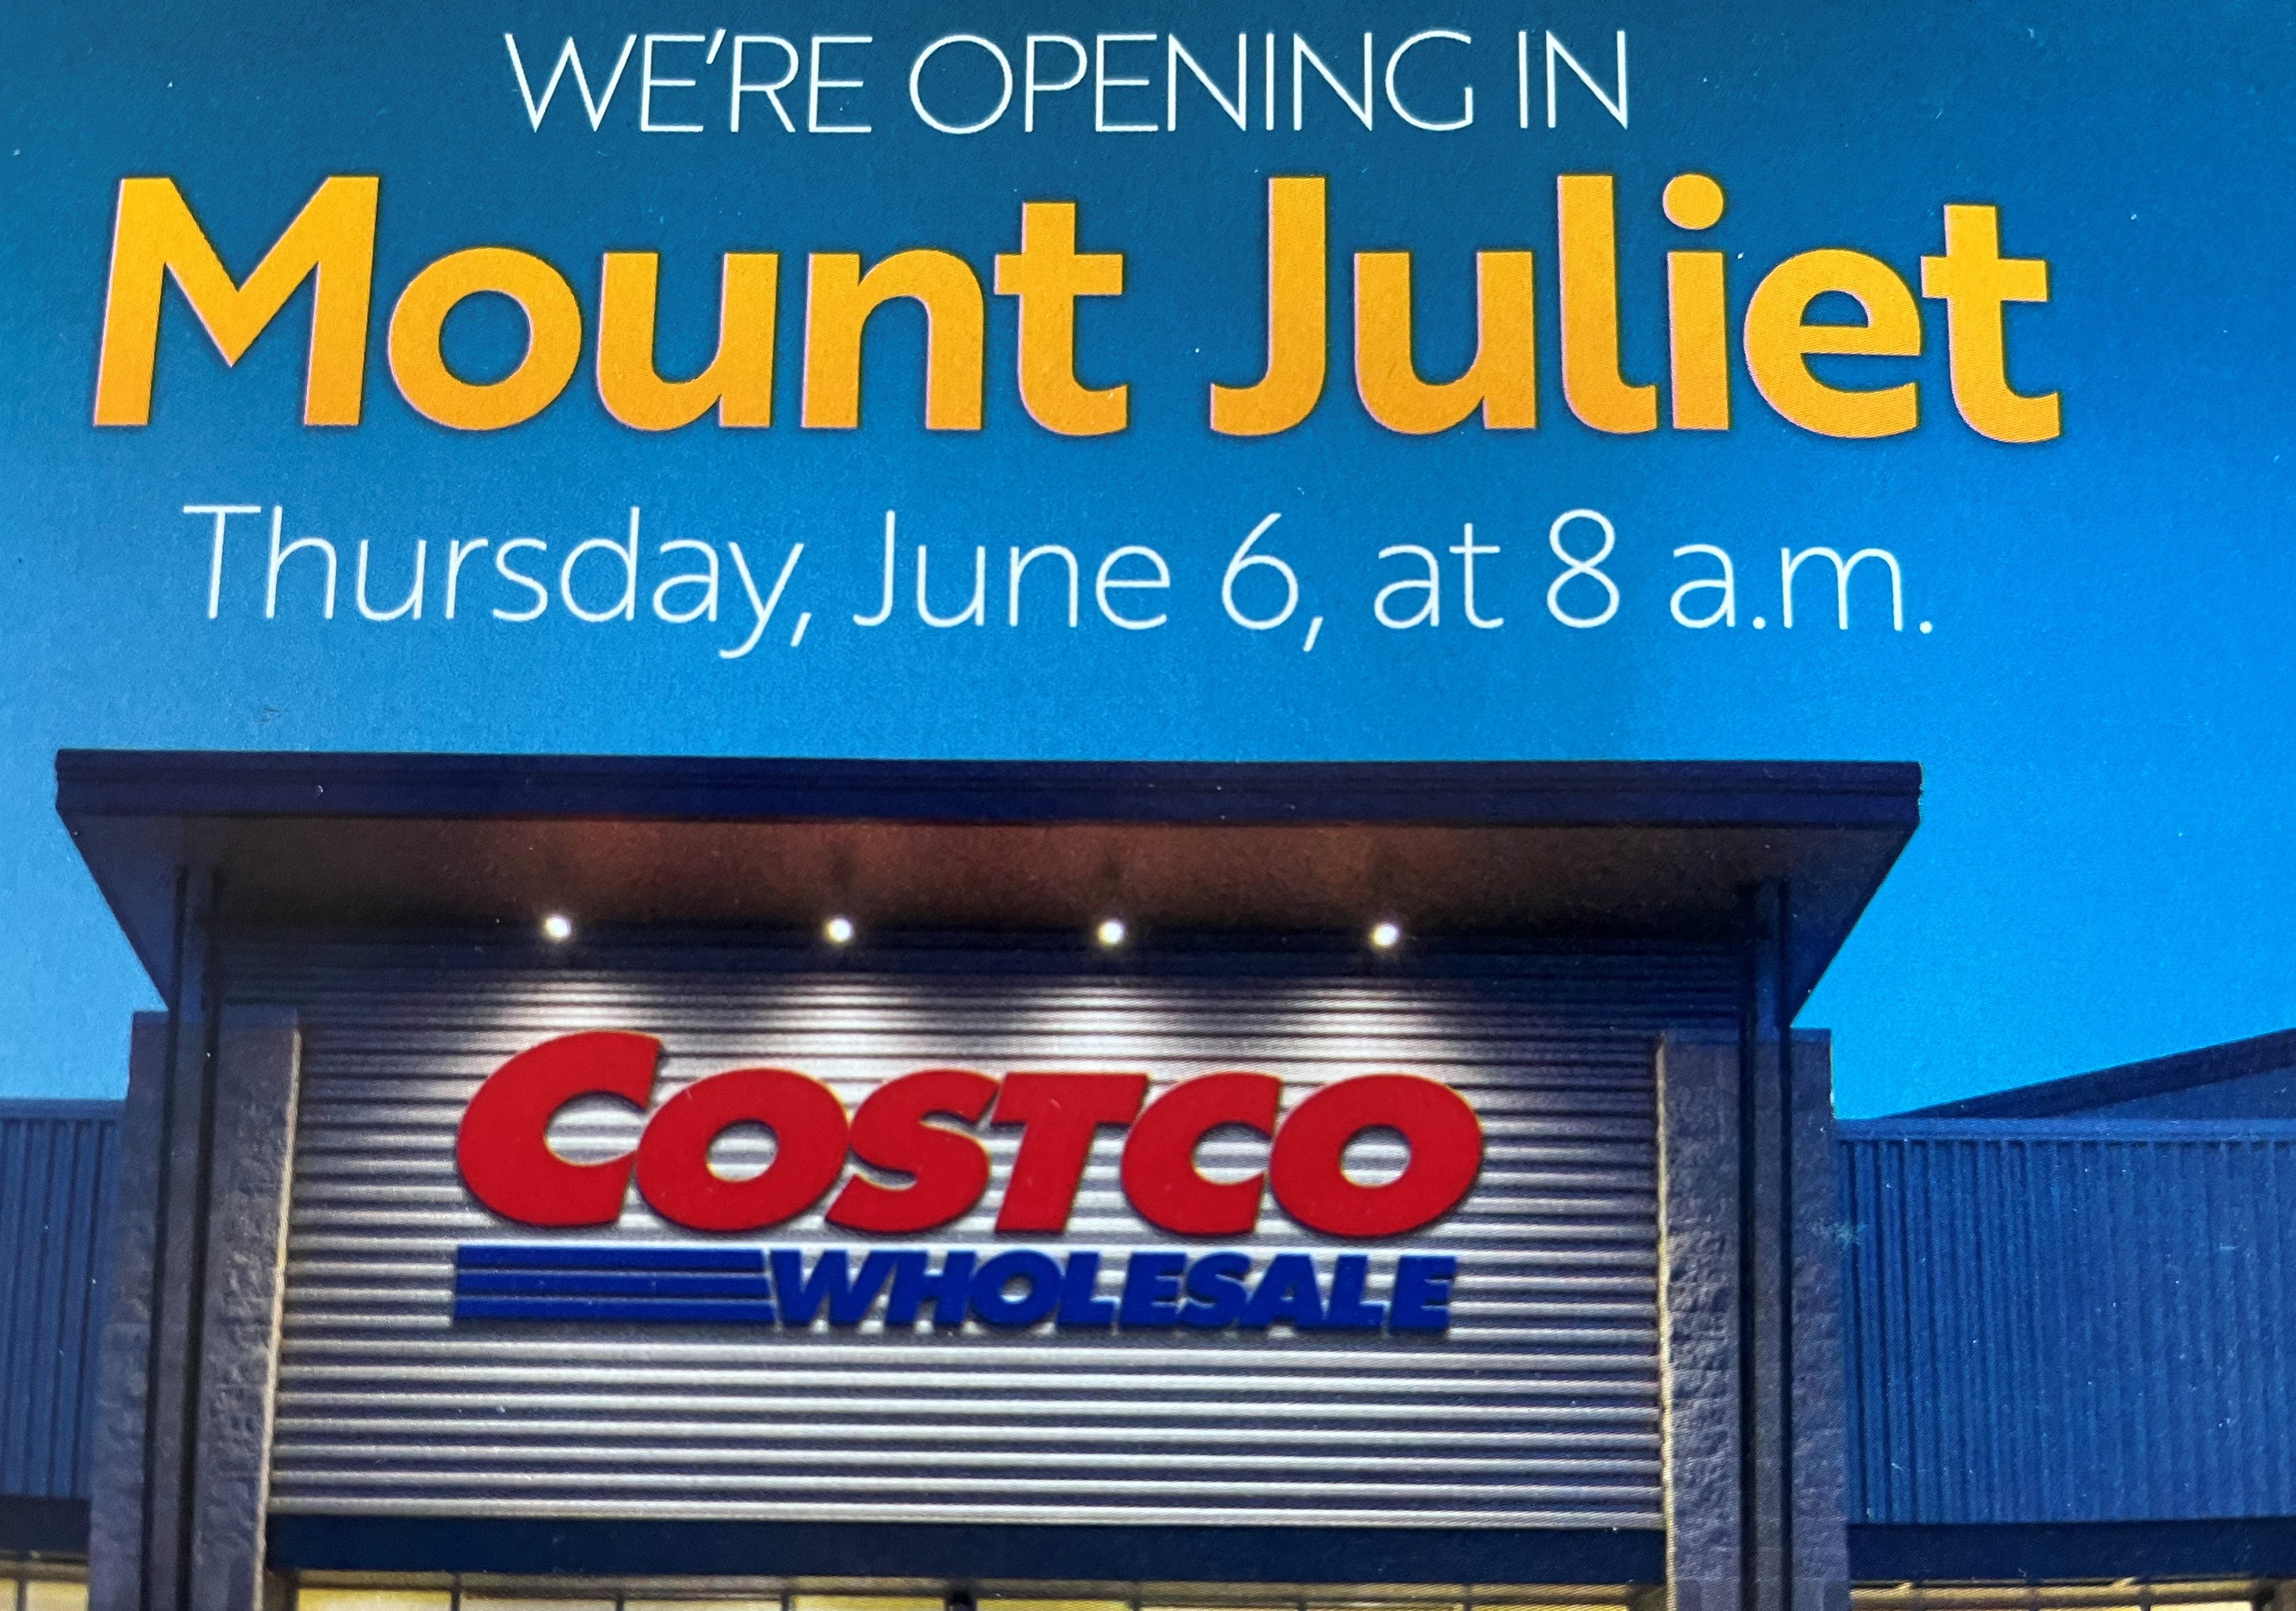 Newest Middle Tennessee Costco announces grand opening date in Mt. Juliet